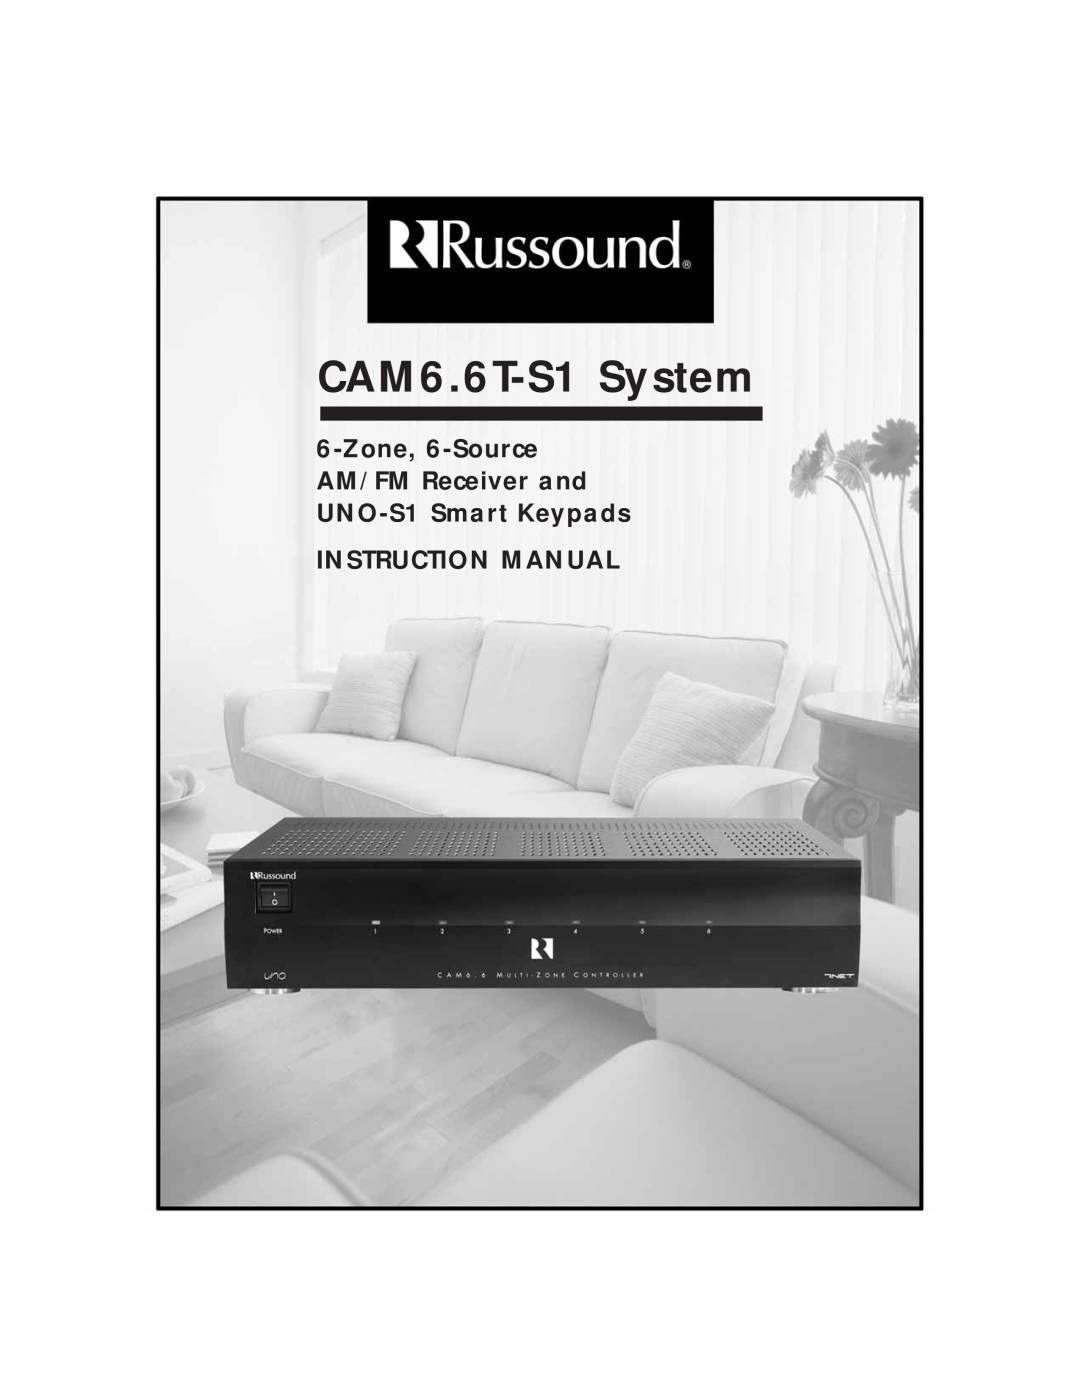 Russound instruction manual Instruction Manual, CAM6.6T-S1System 